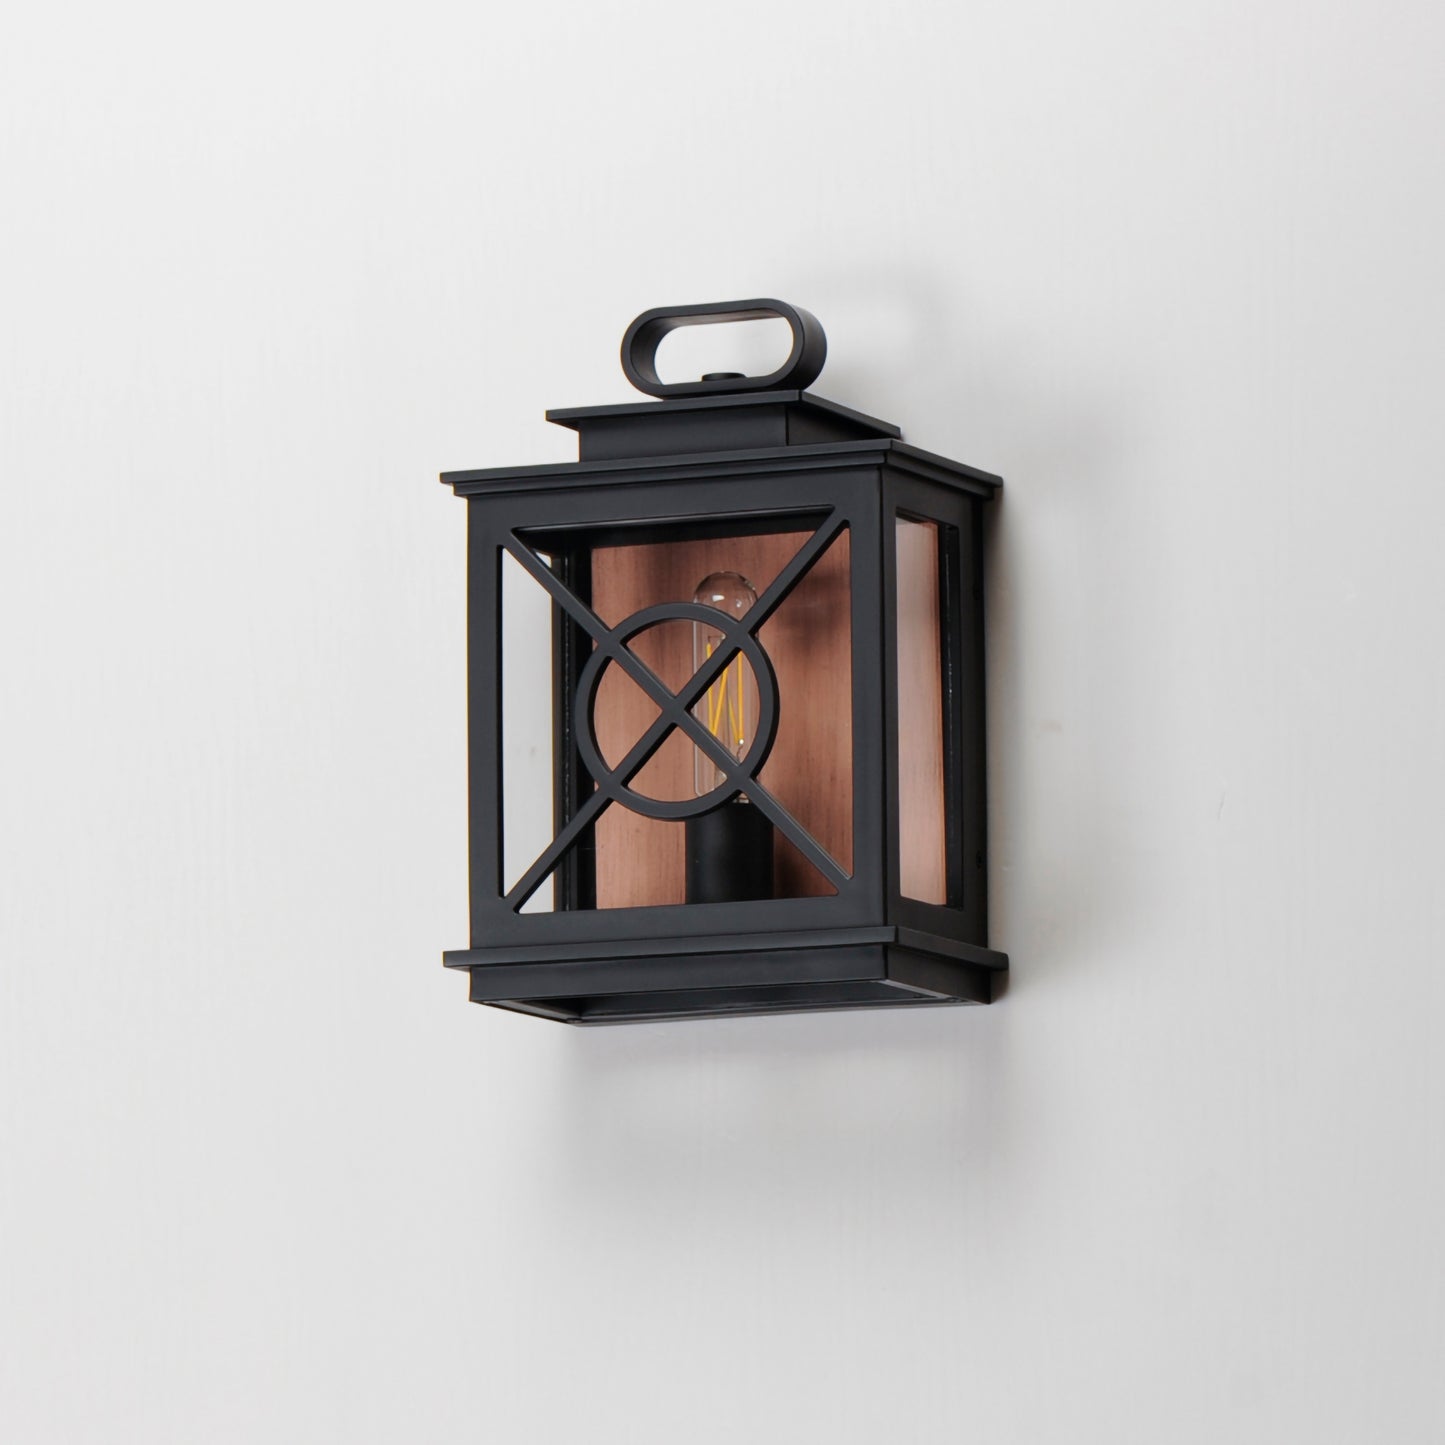 40802CLACPBK - Yorktown VX 12" Outdoor Wall Sconce - Black/Aged Copper